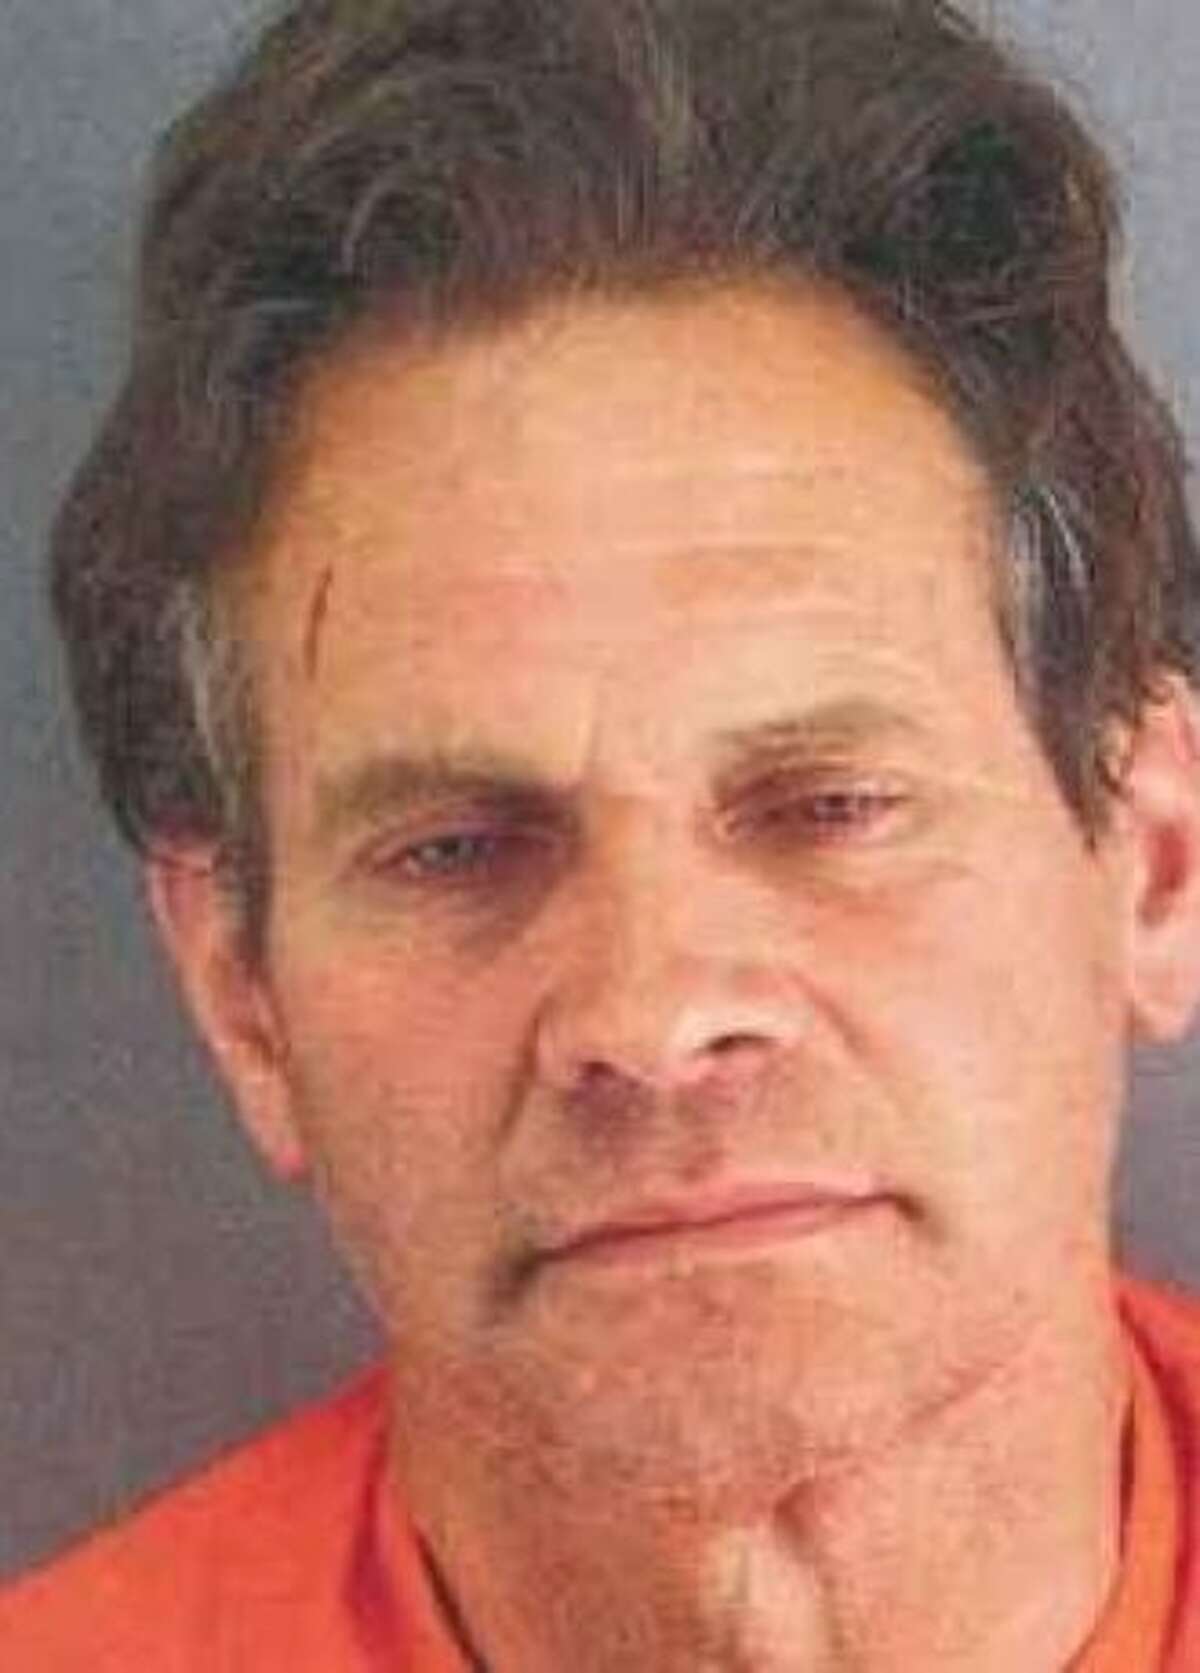 Dennis McGuire, suspected of stealing hundreds of feet of copper wiring from an underground vault in San Francisco.